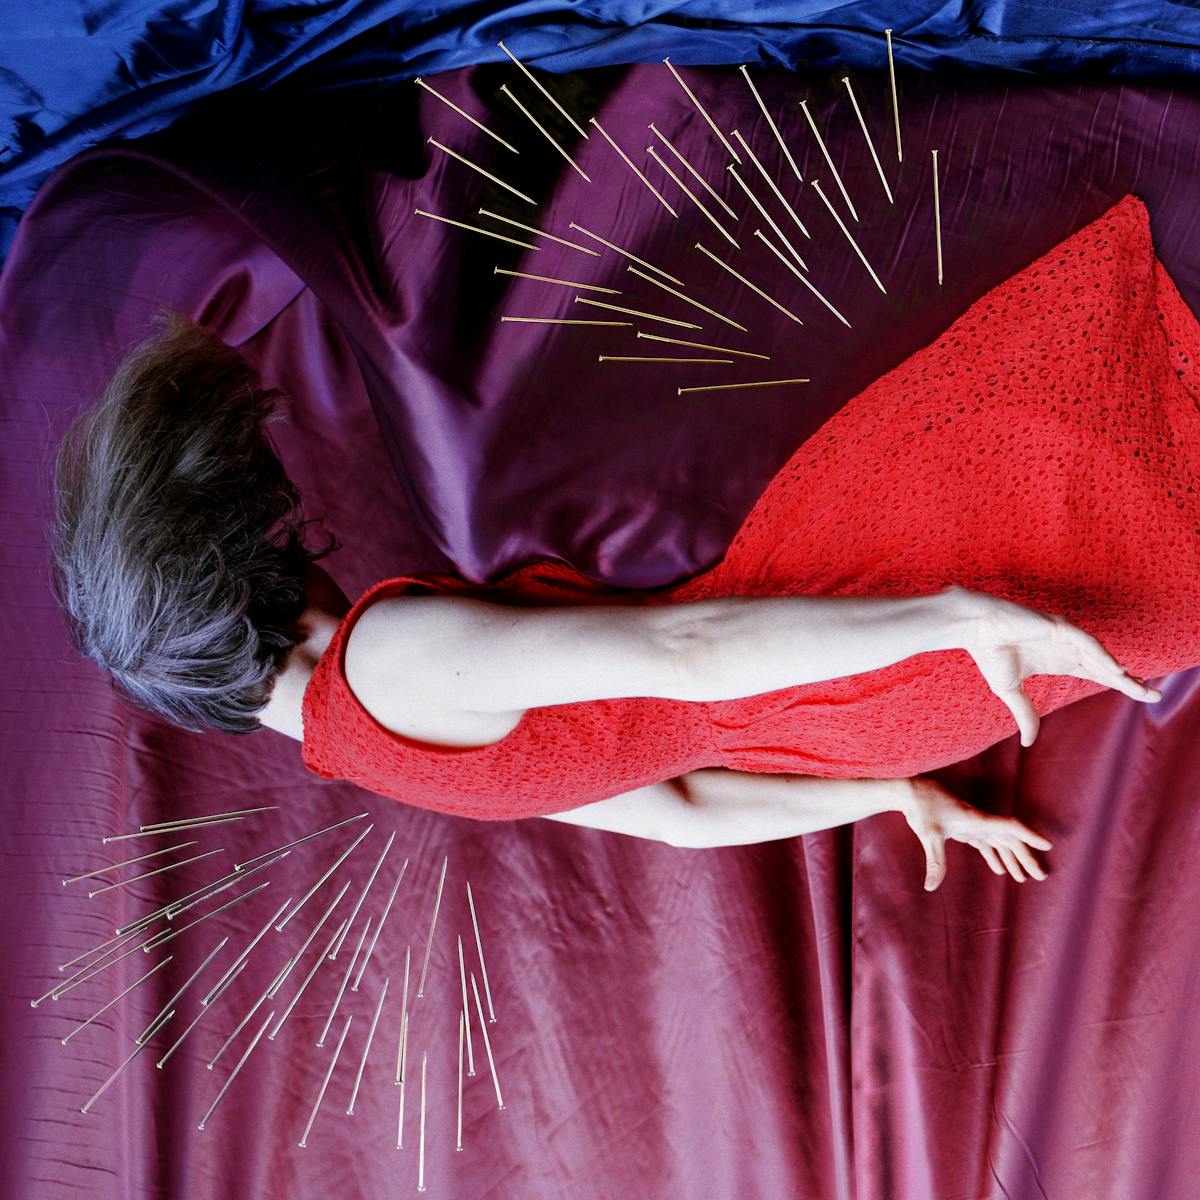 Artwork created with a colour photographic print of a female figure in a bright red dress, set against a purple and blue draped silk background. She is lying horizontal in the frame, caught as if in mid fall, hair and dress blown upwards, toes and fingers outstretched. Her face is obscured by her hair. Her body is surrounded by groups of dress pins, laid on top of the photographic print. The pins are arranged as if they are a flight of arrows directed at her body. One group attacks her back from underneath, another her feet and ankles from above and below. A final group descend from above towards her billowing skirt.